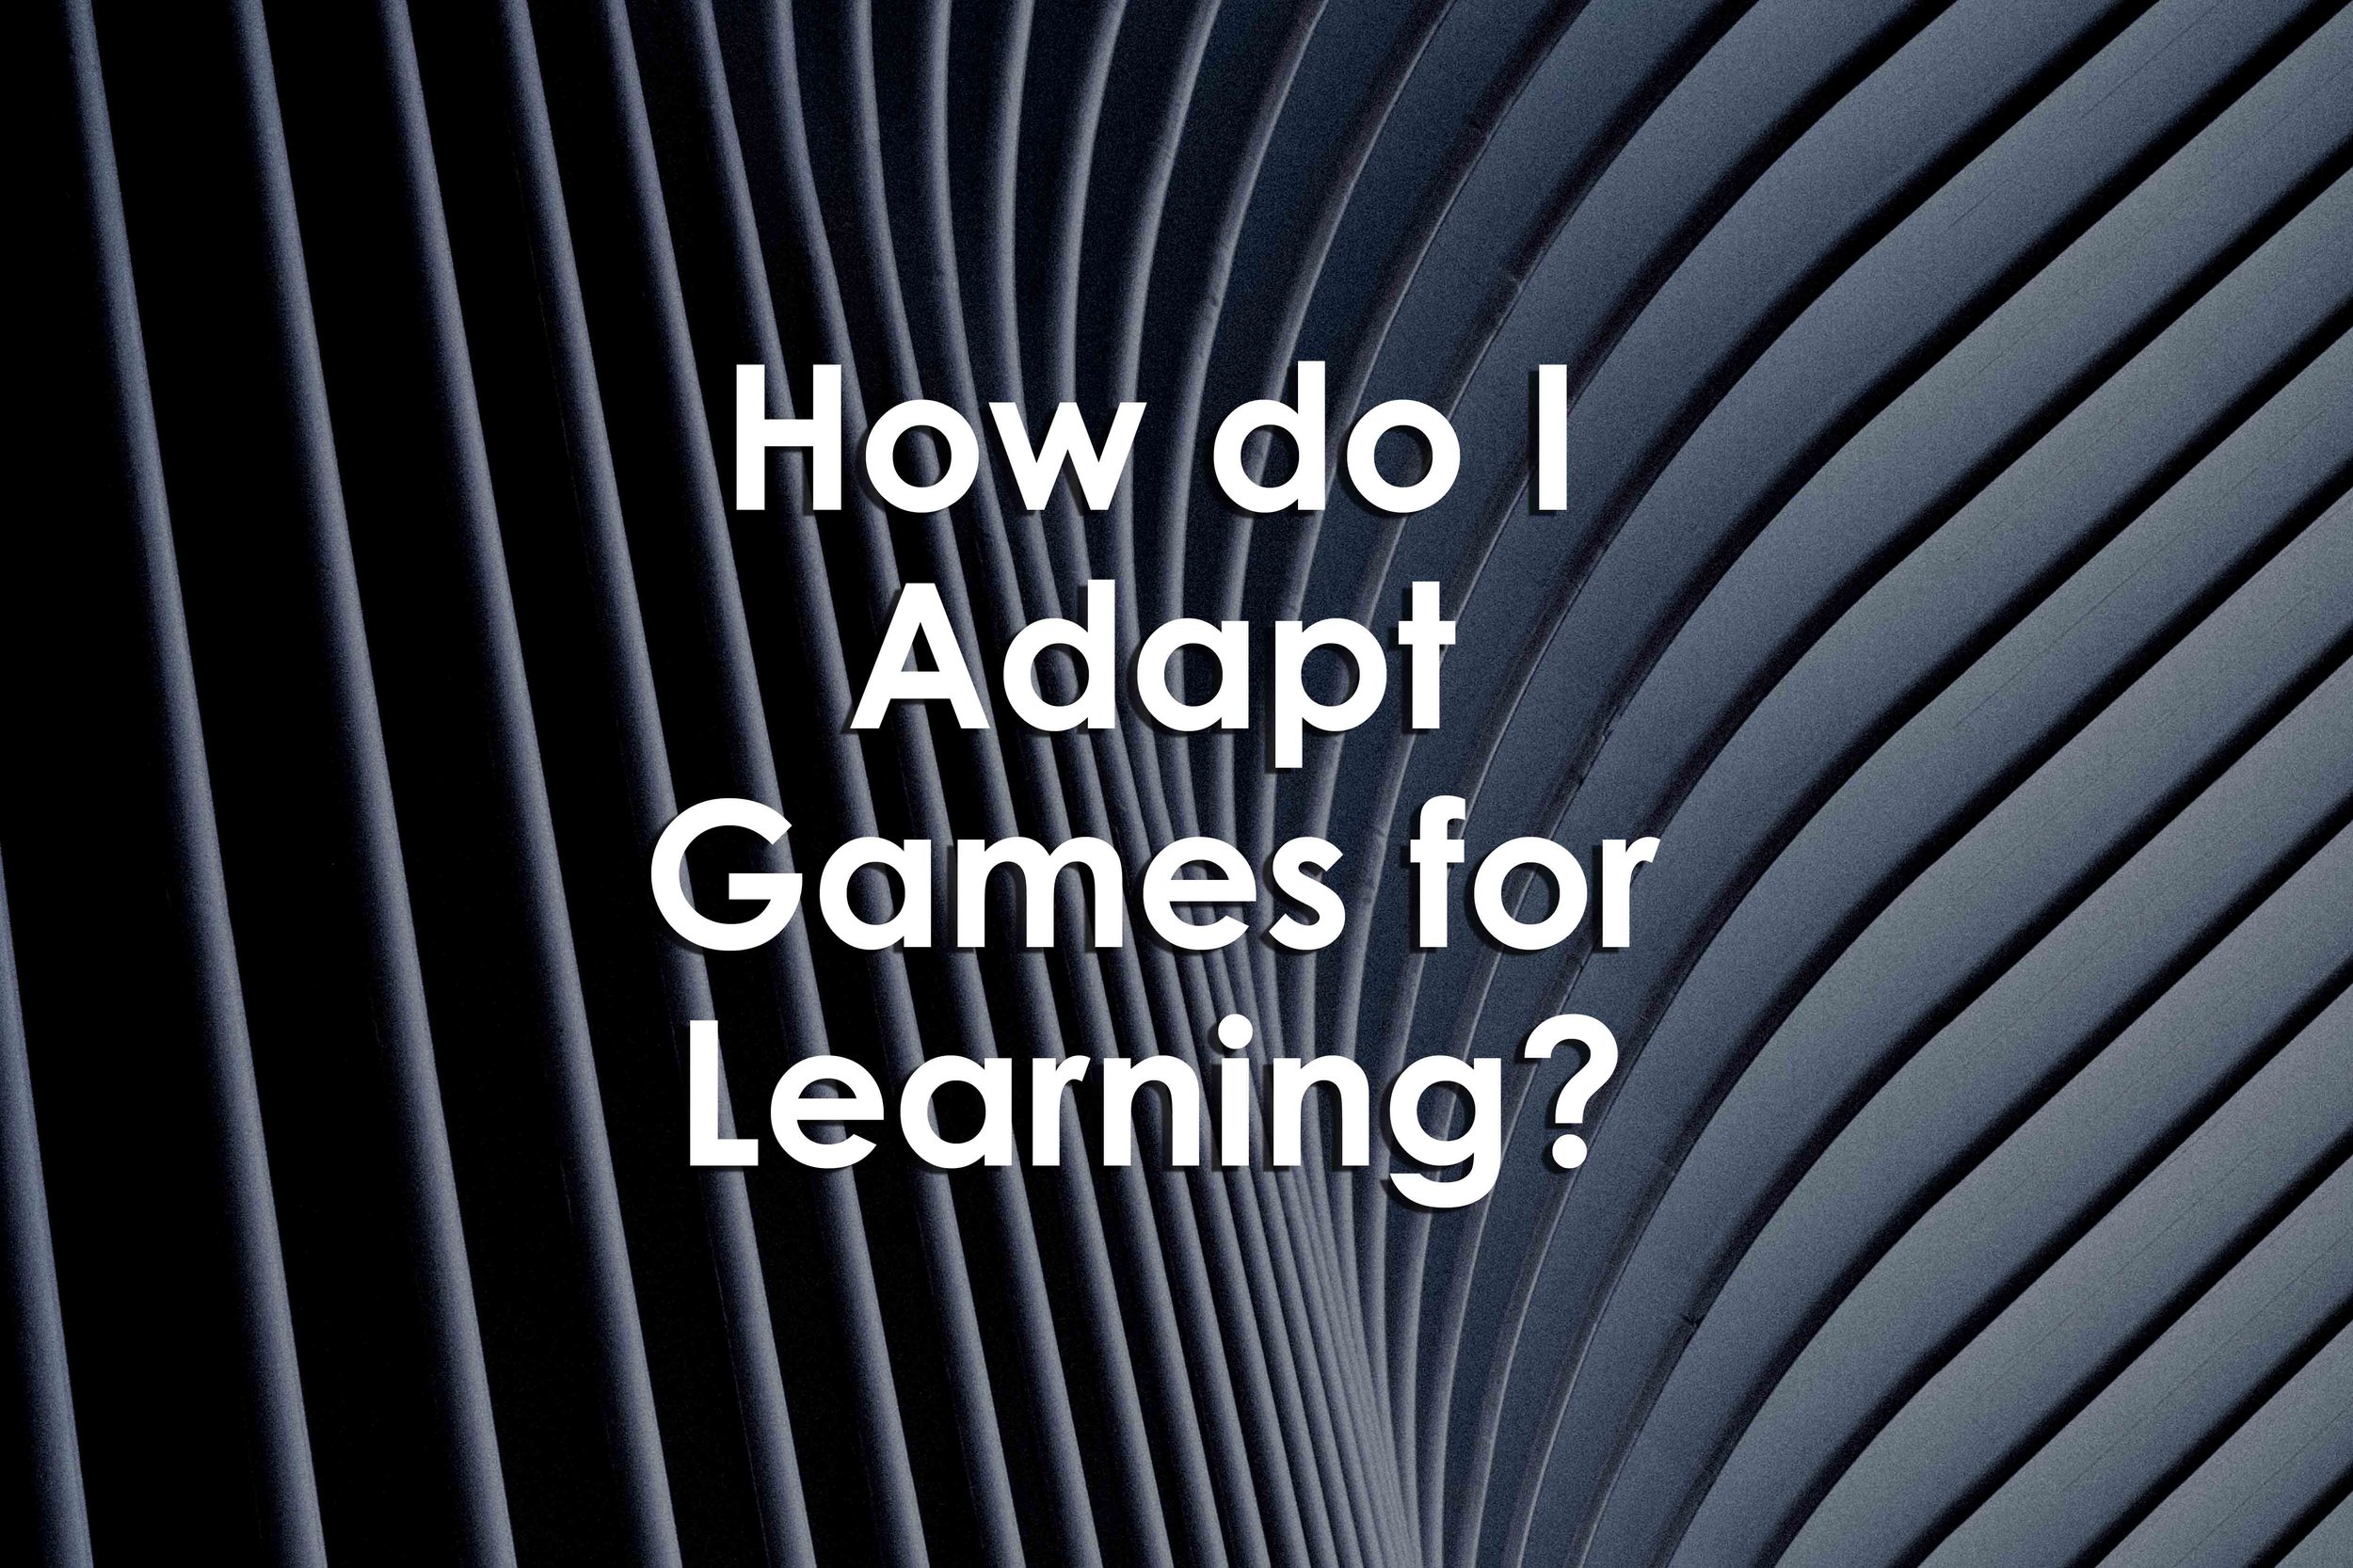 Enhancing Games with Assessment and Metacognitive Emphases (EGAME)